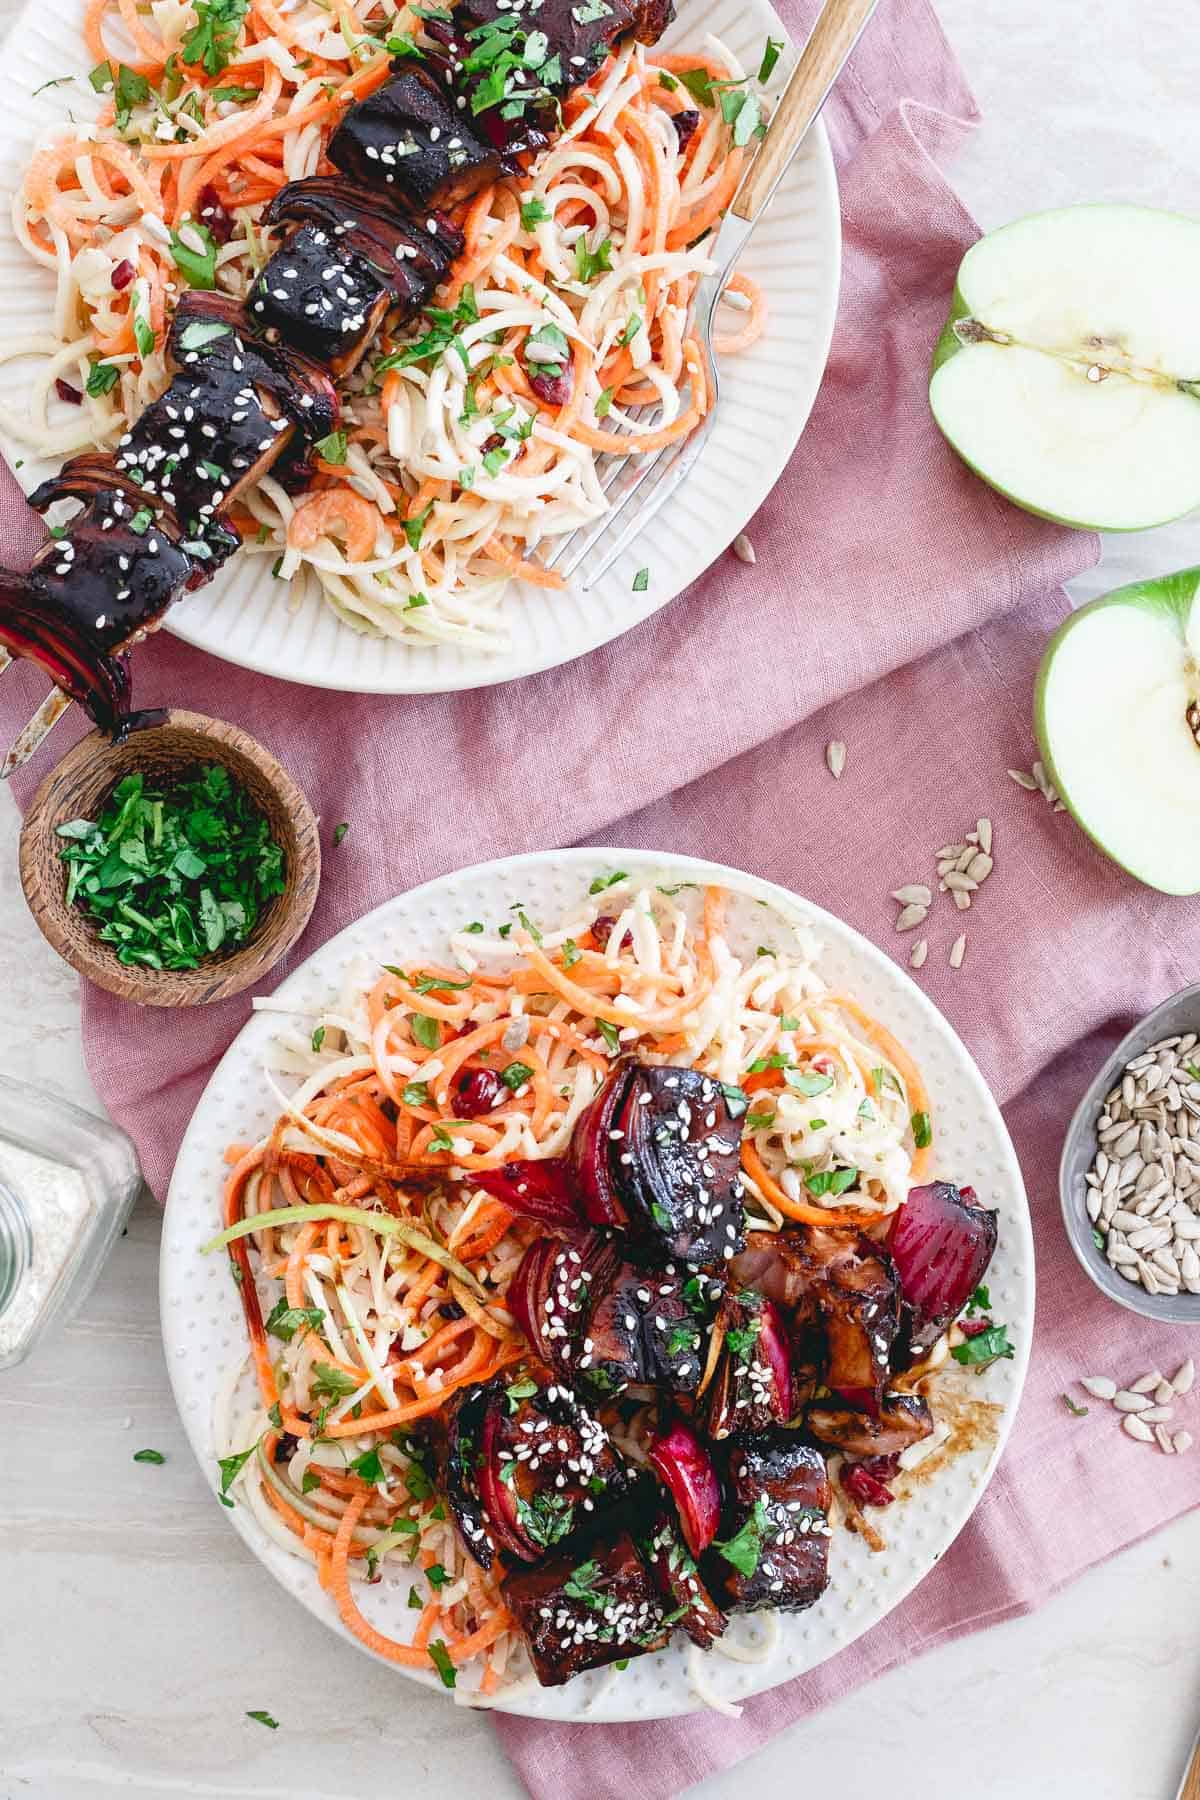 A bright, refreshing spiralized winter salad with tart cherry lime yogurt dressing and these tart cherry glazed Ahi tuna kabobs will brighten any winter blues!